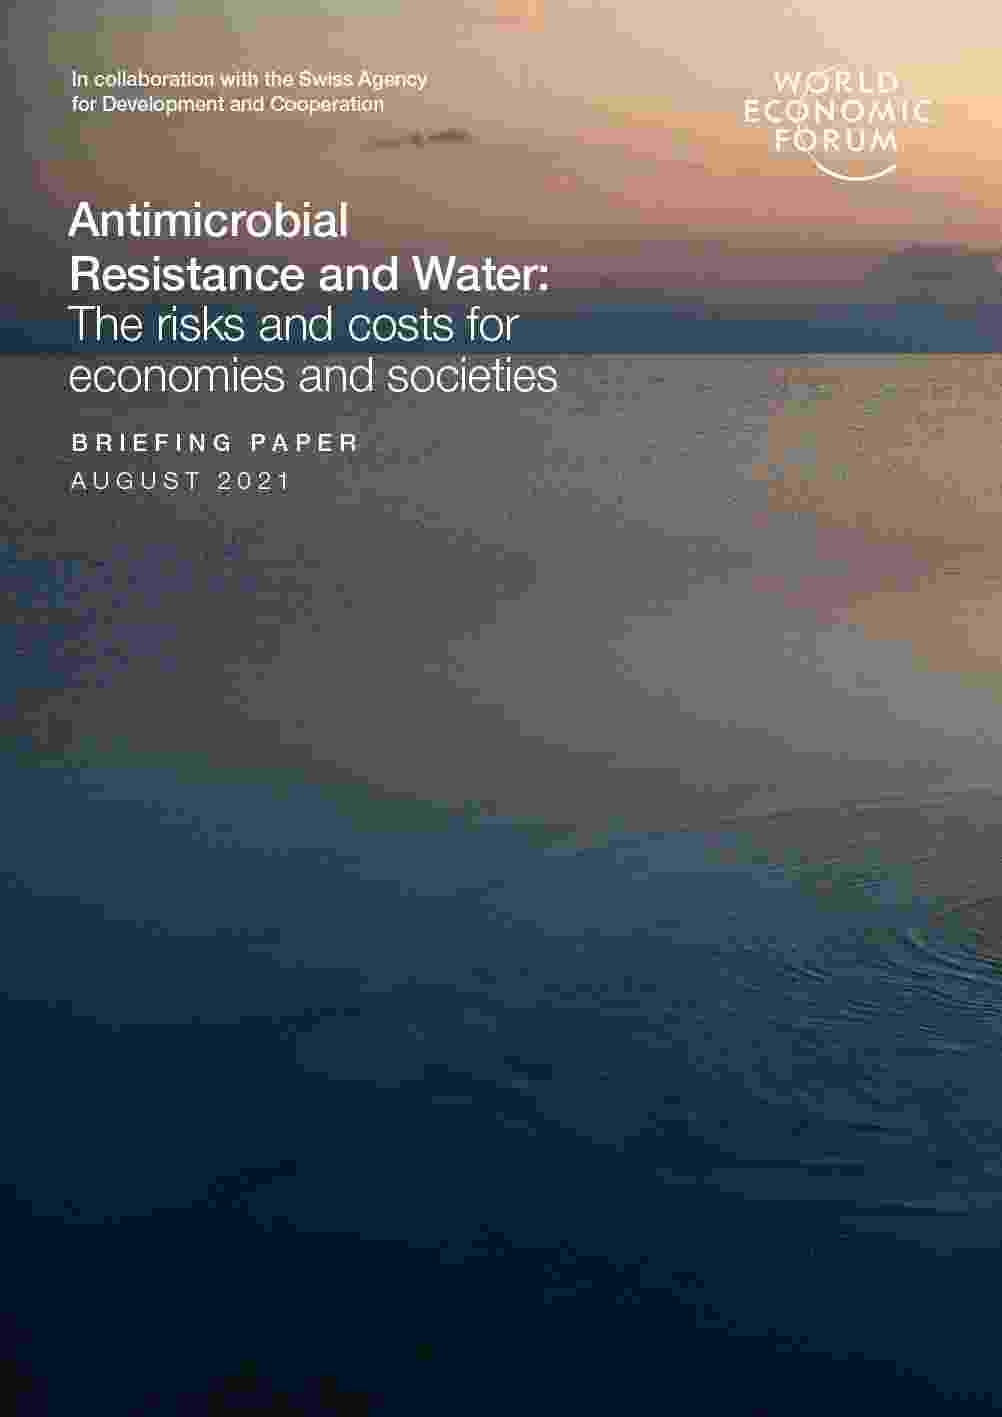 Image shows front cover of WEF briefing paper on Antimicrobial Resistance and Water, published August 2021, showing a hazy sunset over a large expanse of water